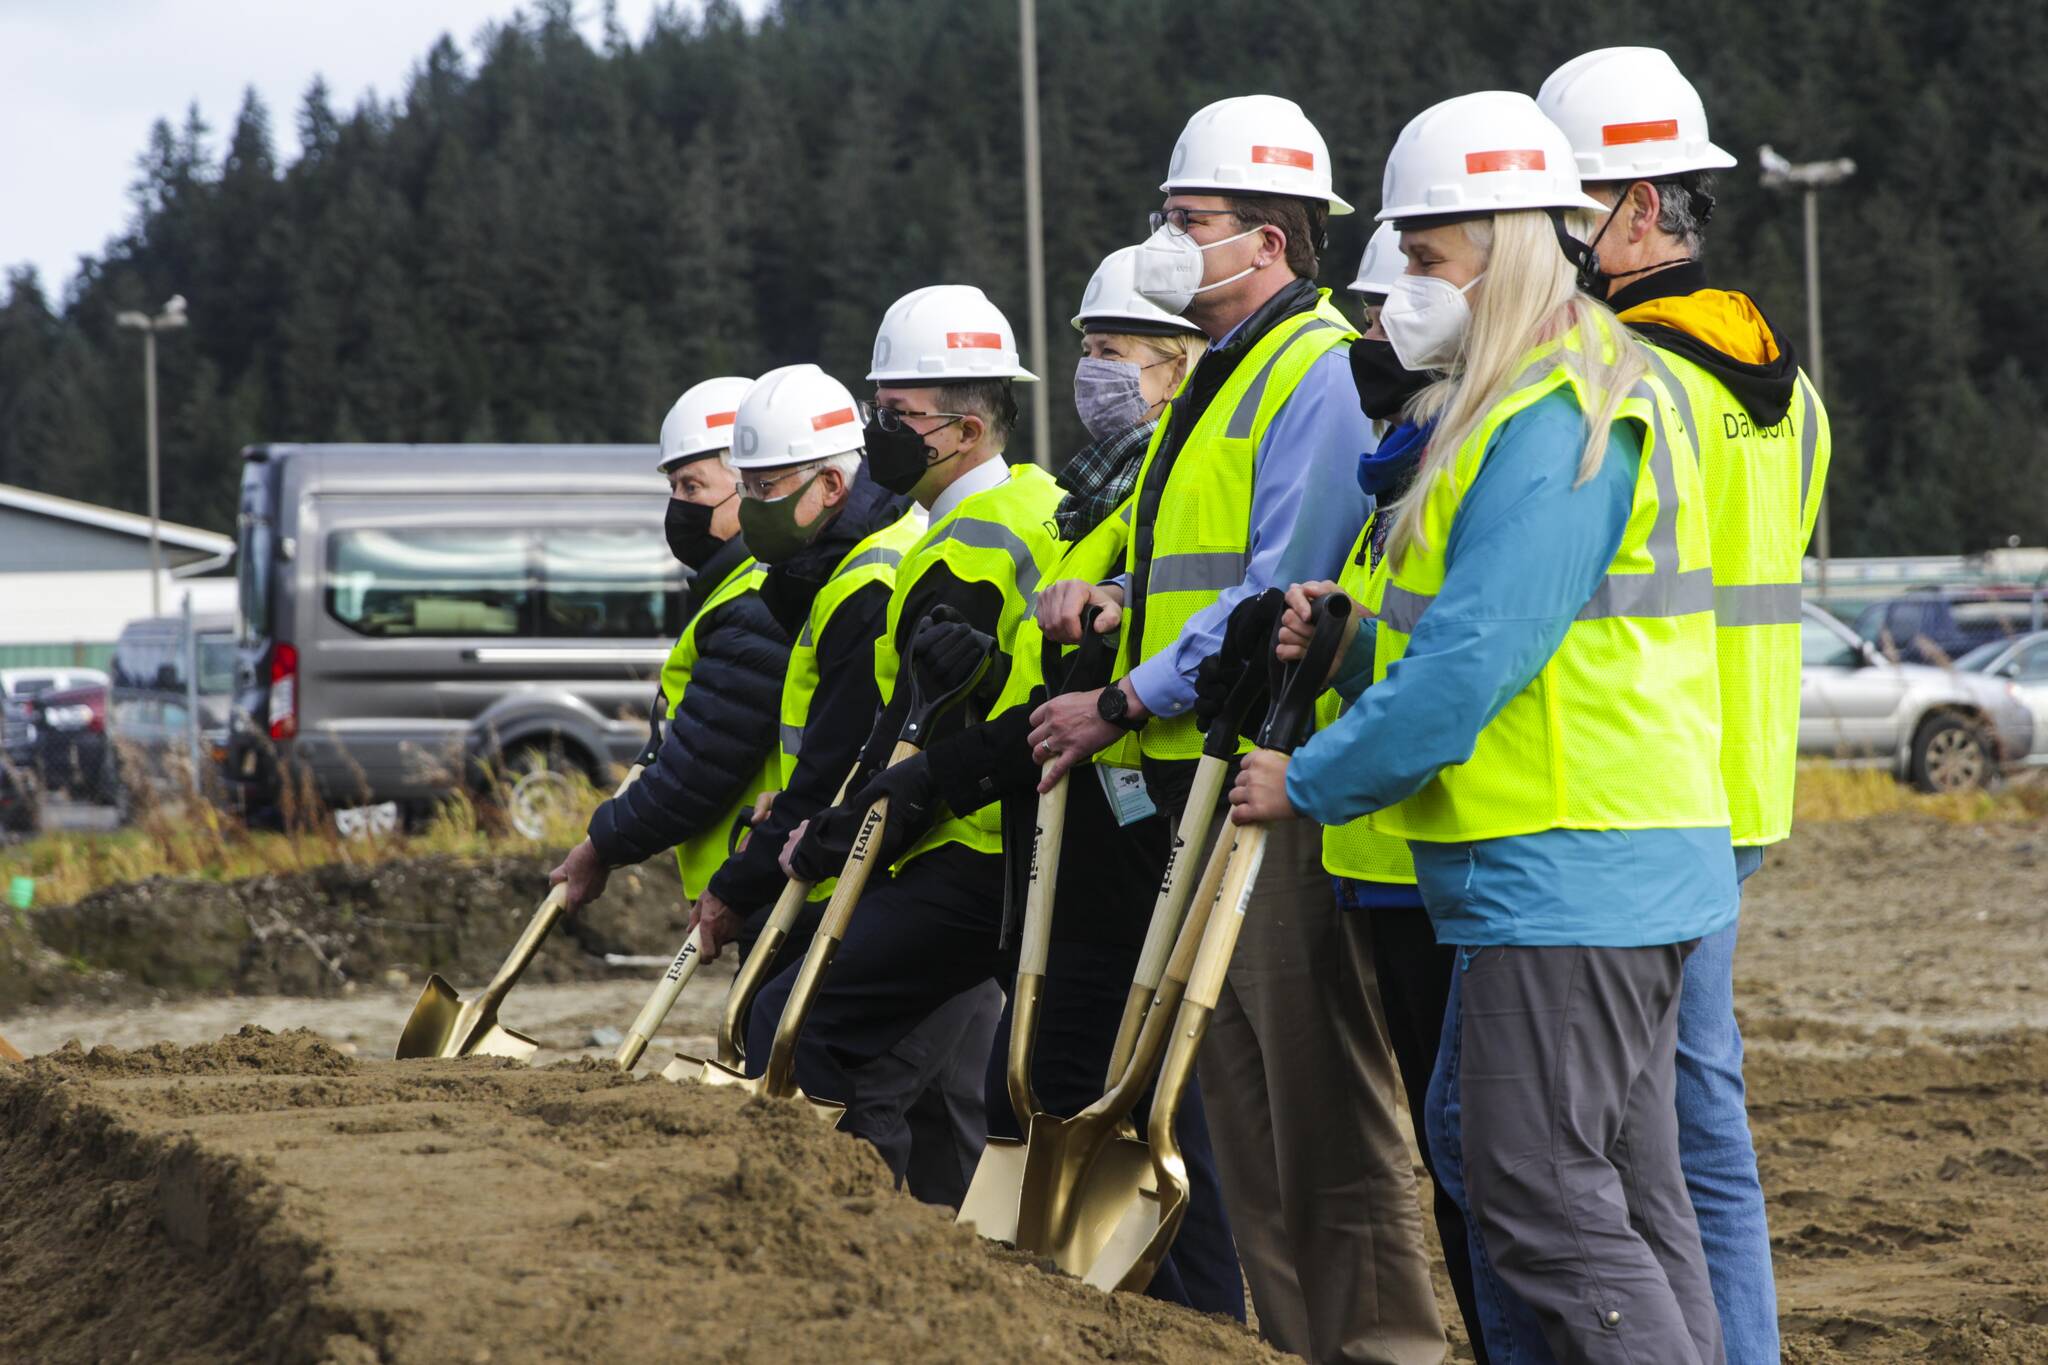 Local officials and dignitaries prepare to ceremonially break ground on the Teal Street Center, a multi-tenant building housing a number of nonprofit and tribal services for Southeast residents next to the Glory Hall on Nov. 2, 2021. (Michael S. Lockett / Juneau Empire)